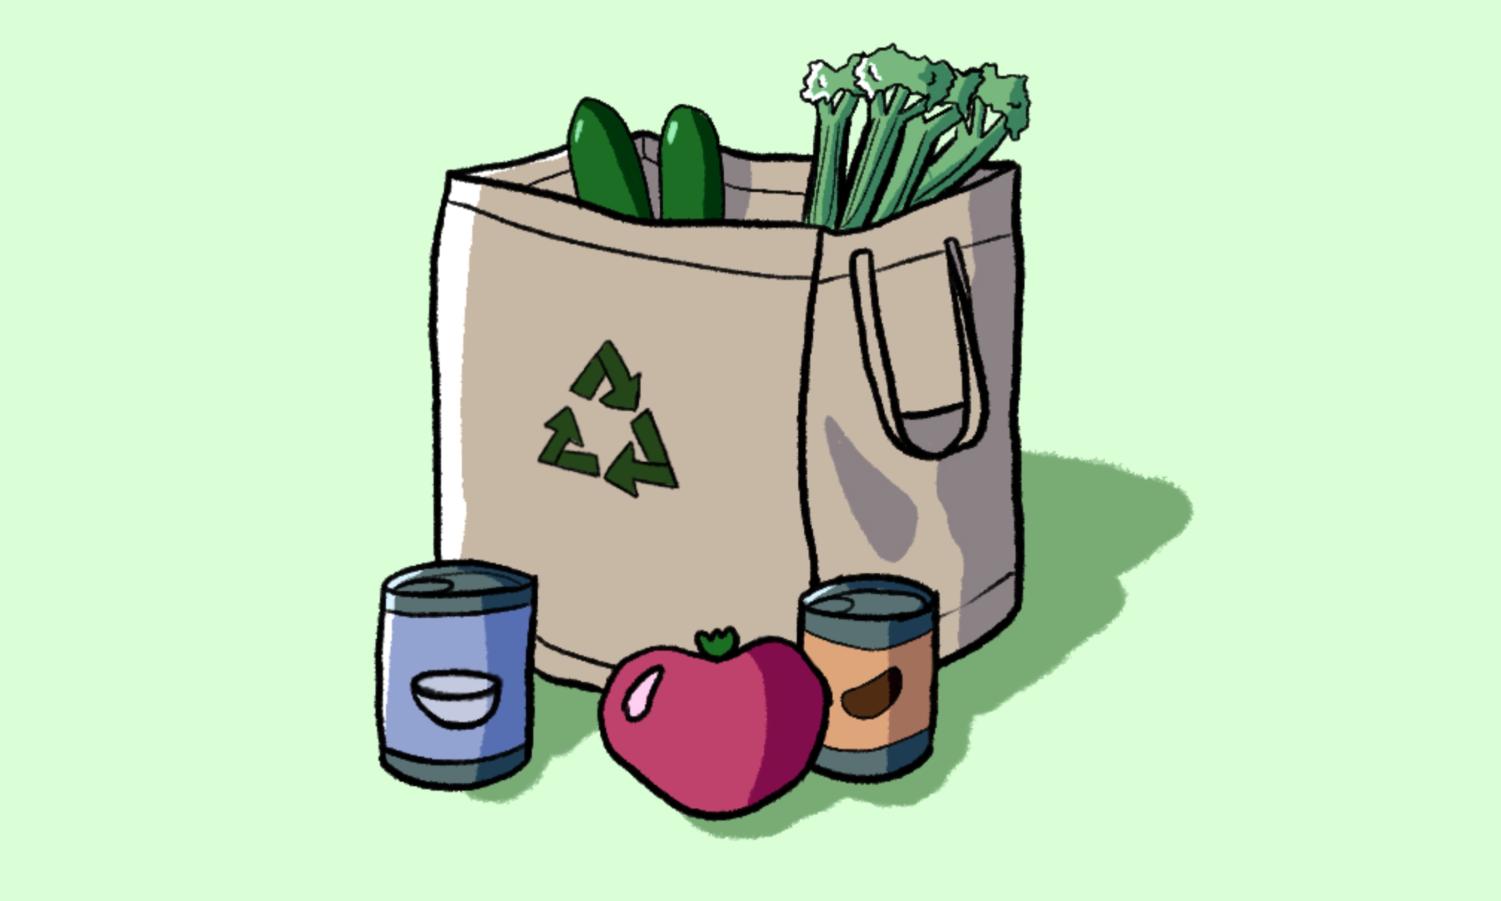 Drawing+of+green+vegetables+inside+of+a+paper+grocery+bag+behind+food+cans+and+a+tomato.